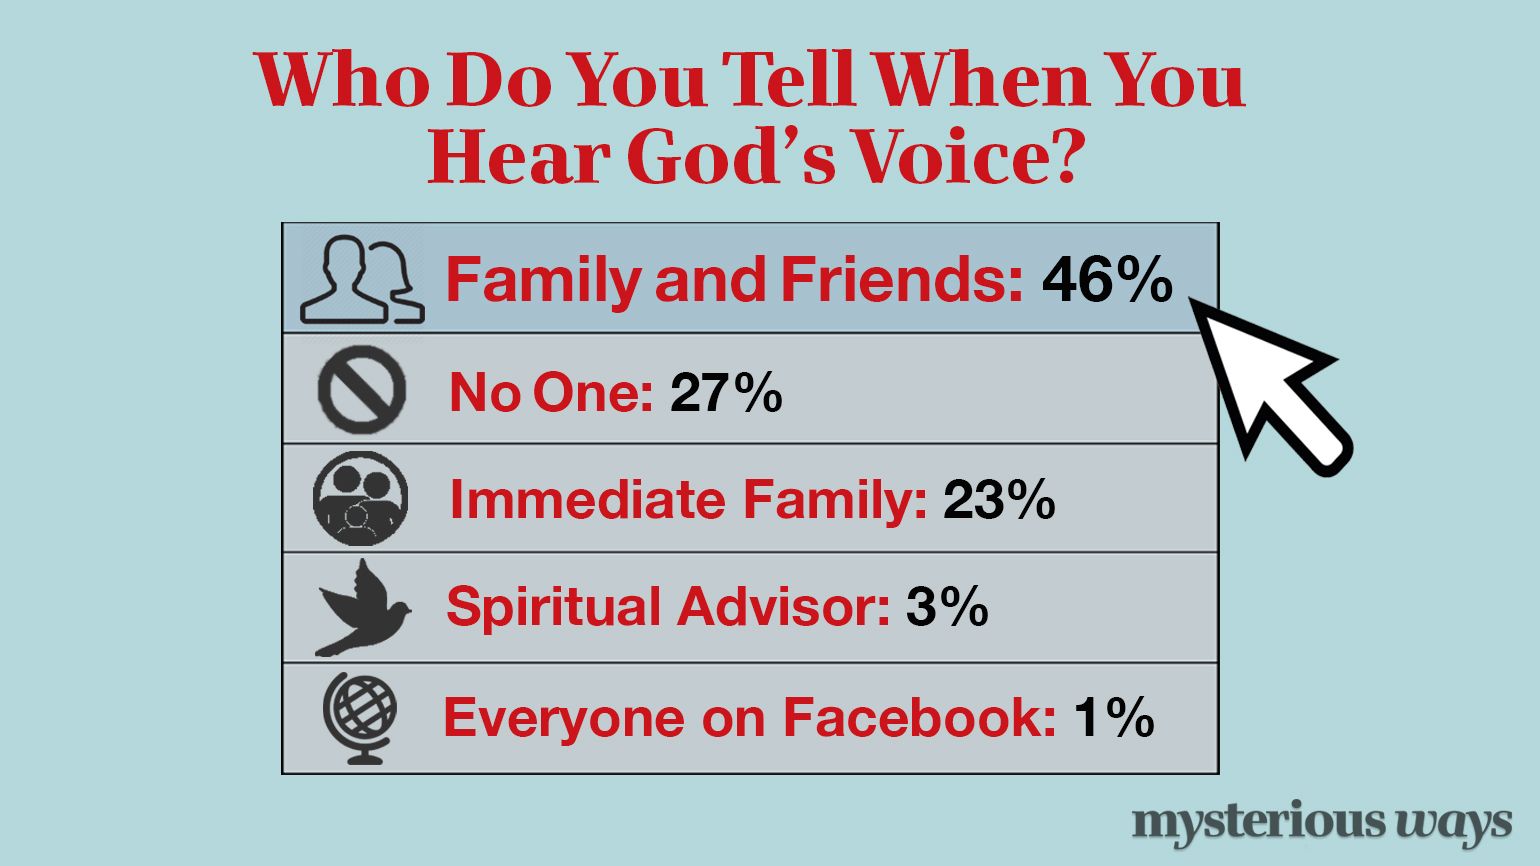 Who Do You Tell When You Hear God's Voice?